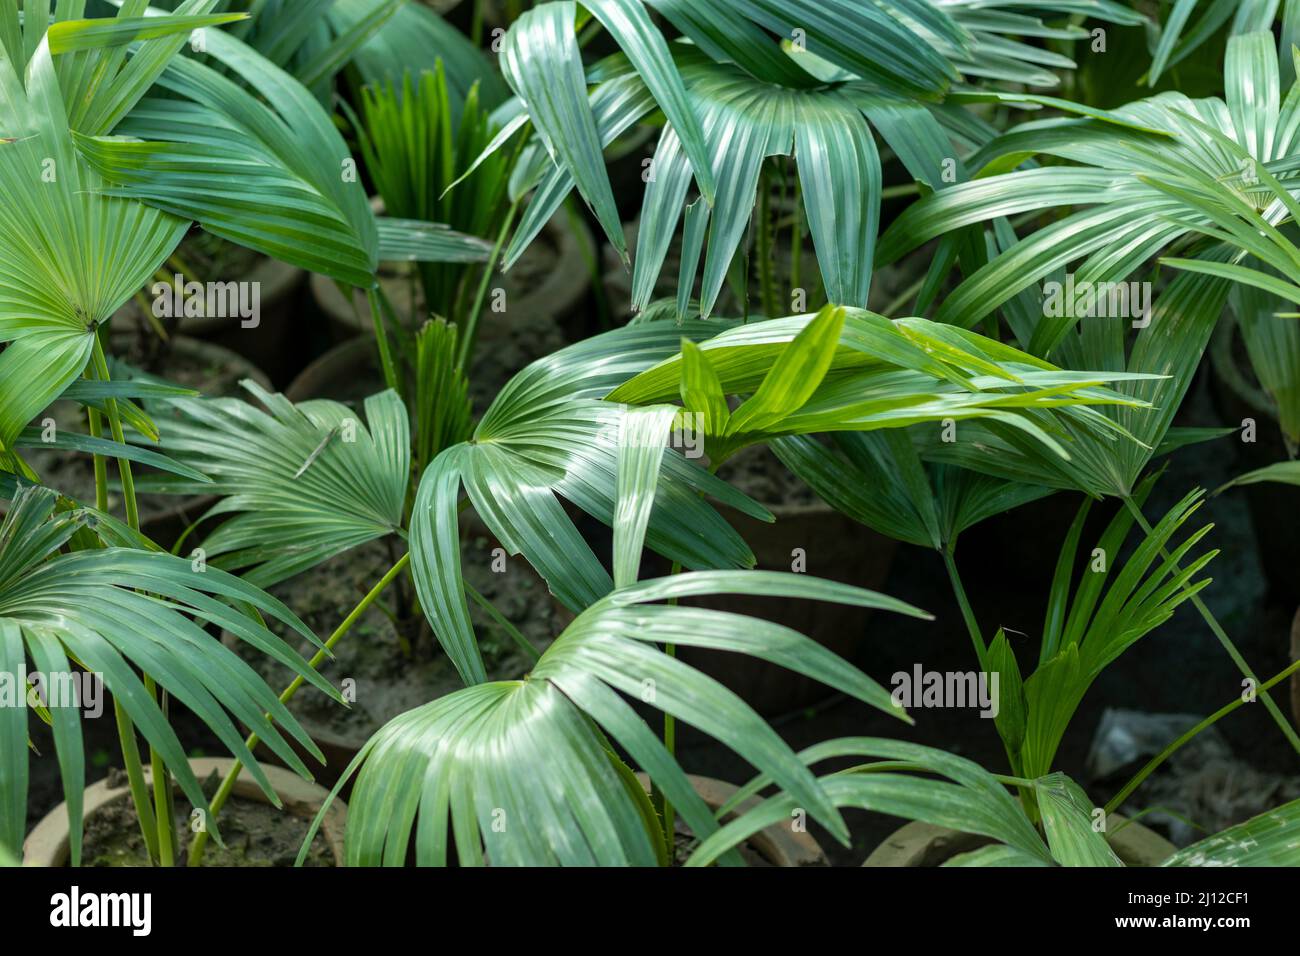 Fan palms or table palm s in plant nursery Stock Photo